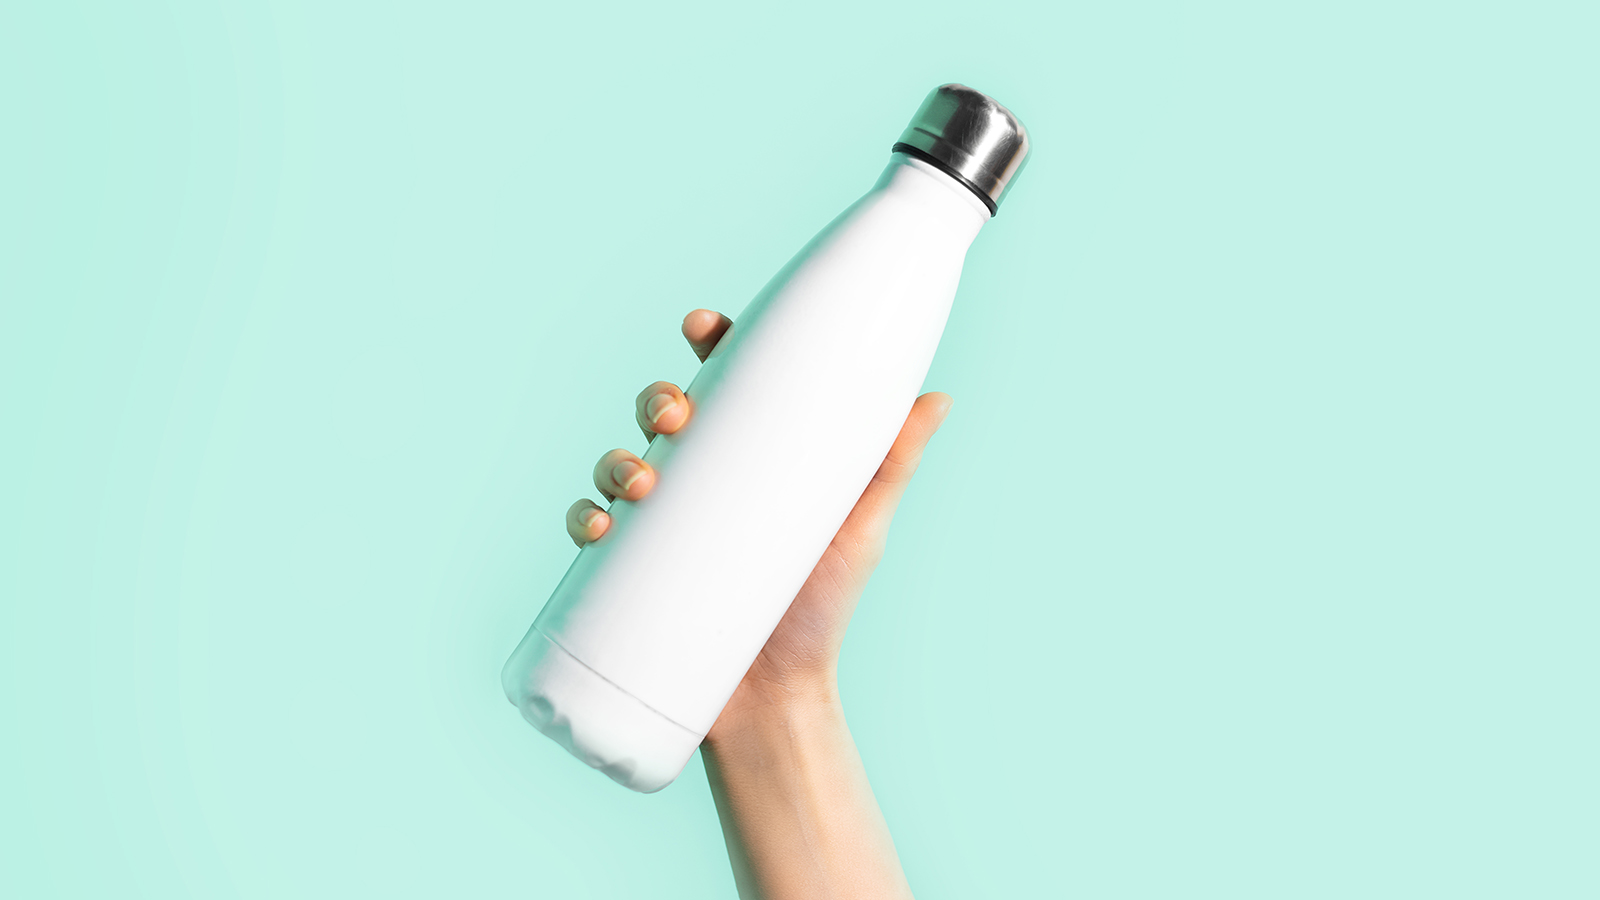 Close-up of female hand, holding white reusable steel stainless eco thermo water bottle with mockup, isolated on background of cyan, aqua menthe color. Be plastic free. Zero waste.